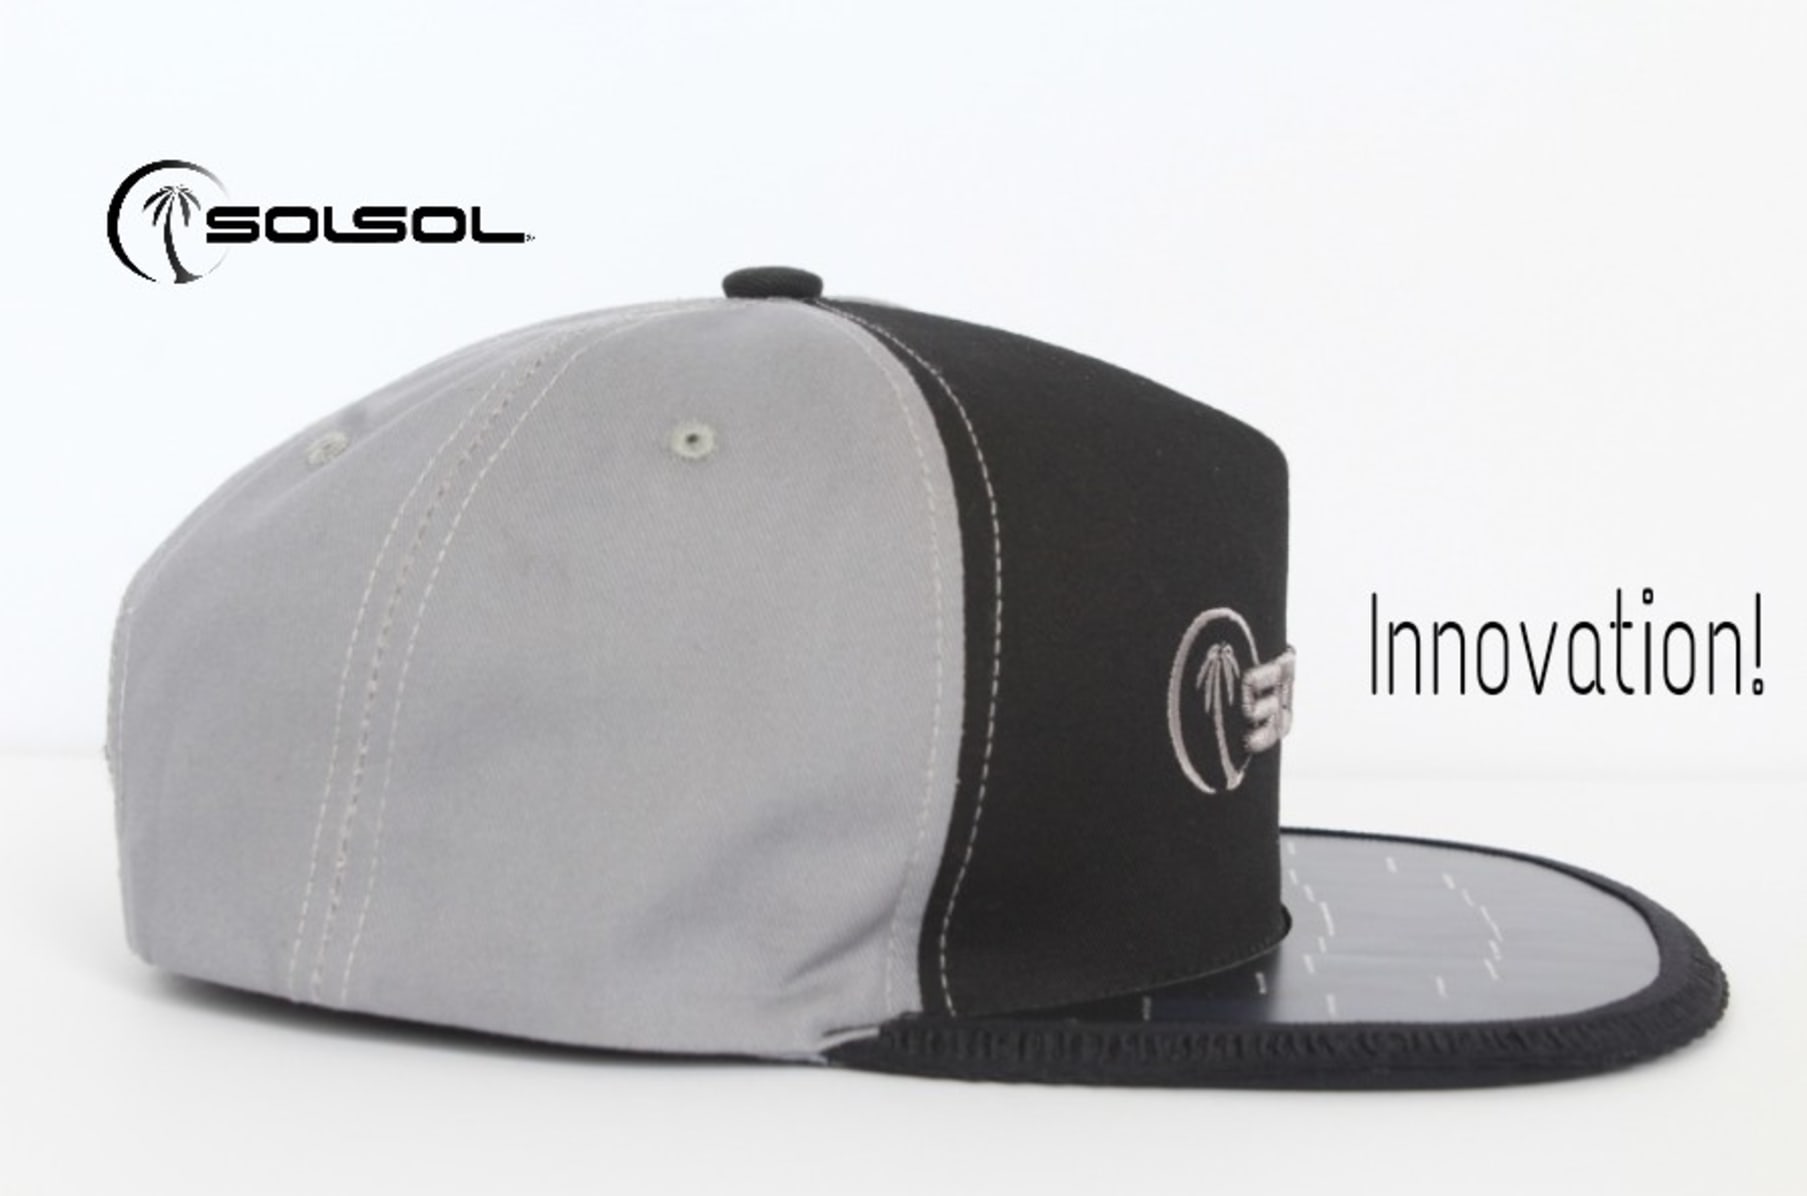 SolSol's baseball hat can charge your phone using solar power